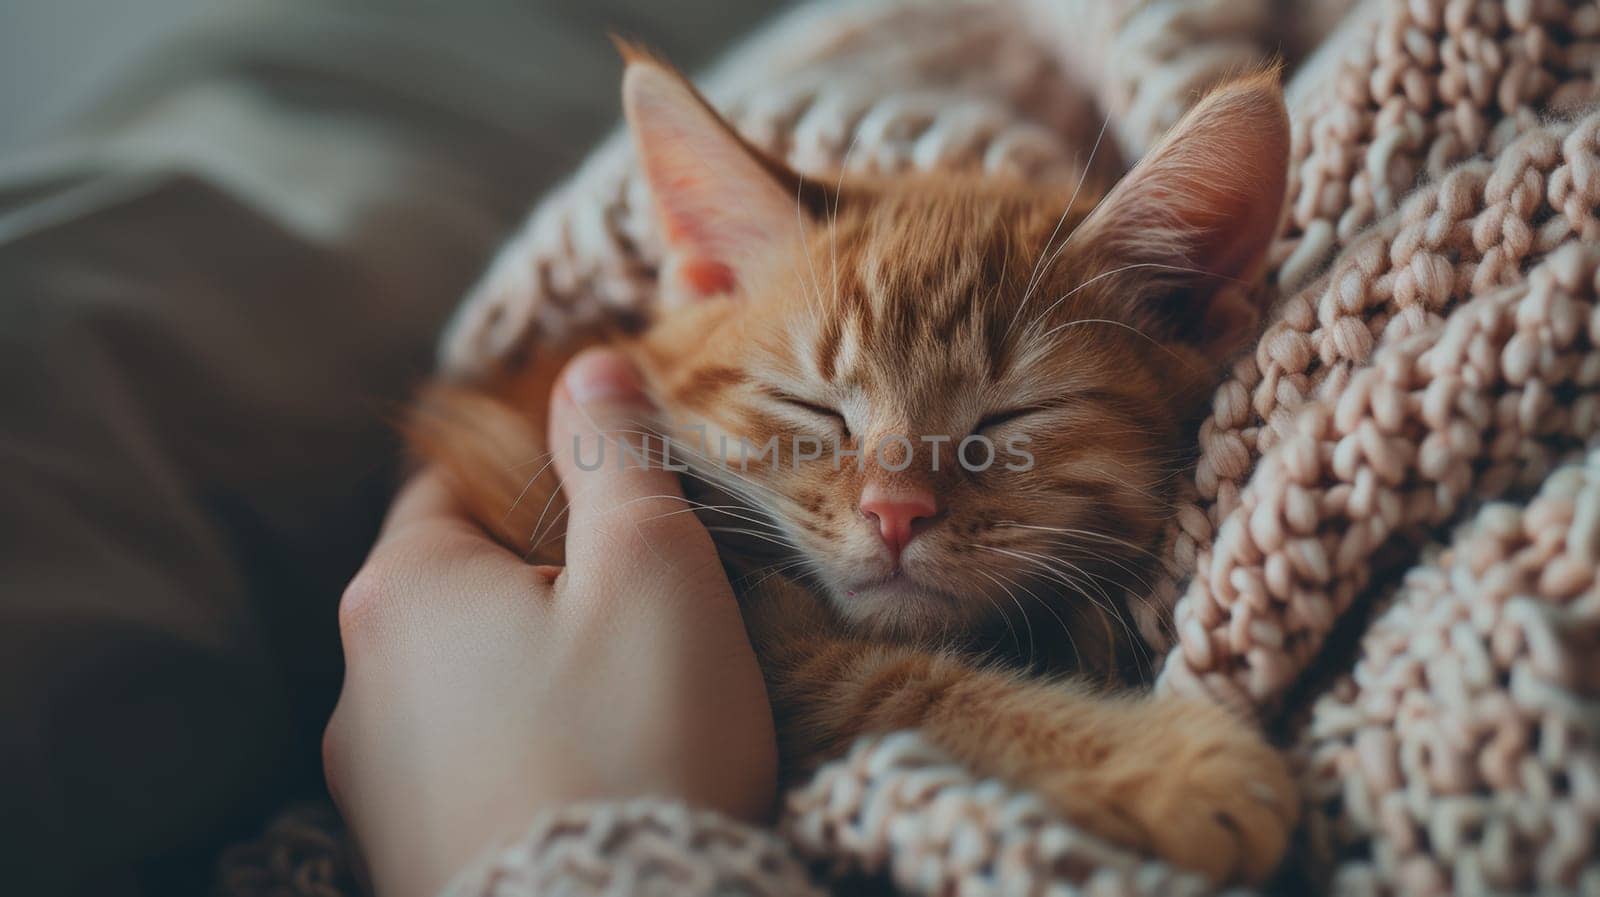 A person holding a cat in their arms while it sleeps